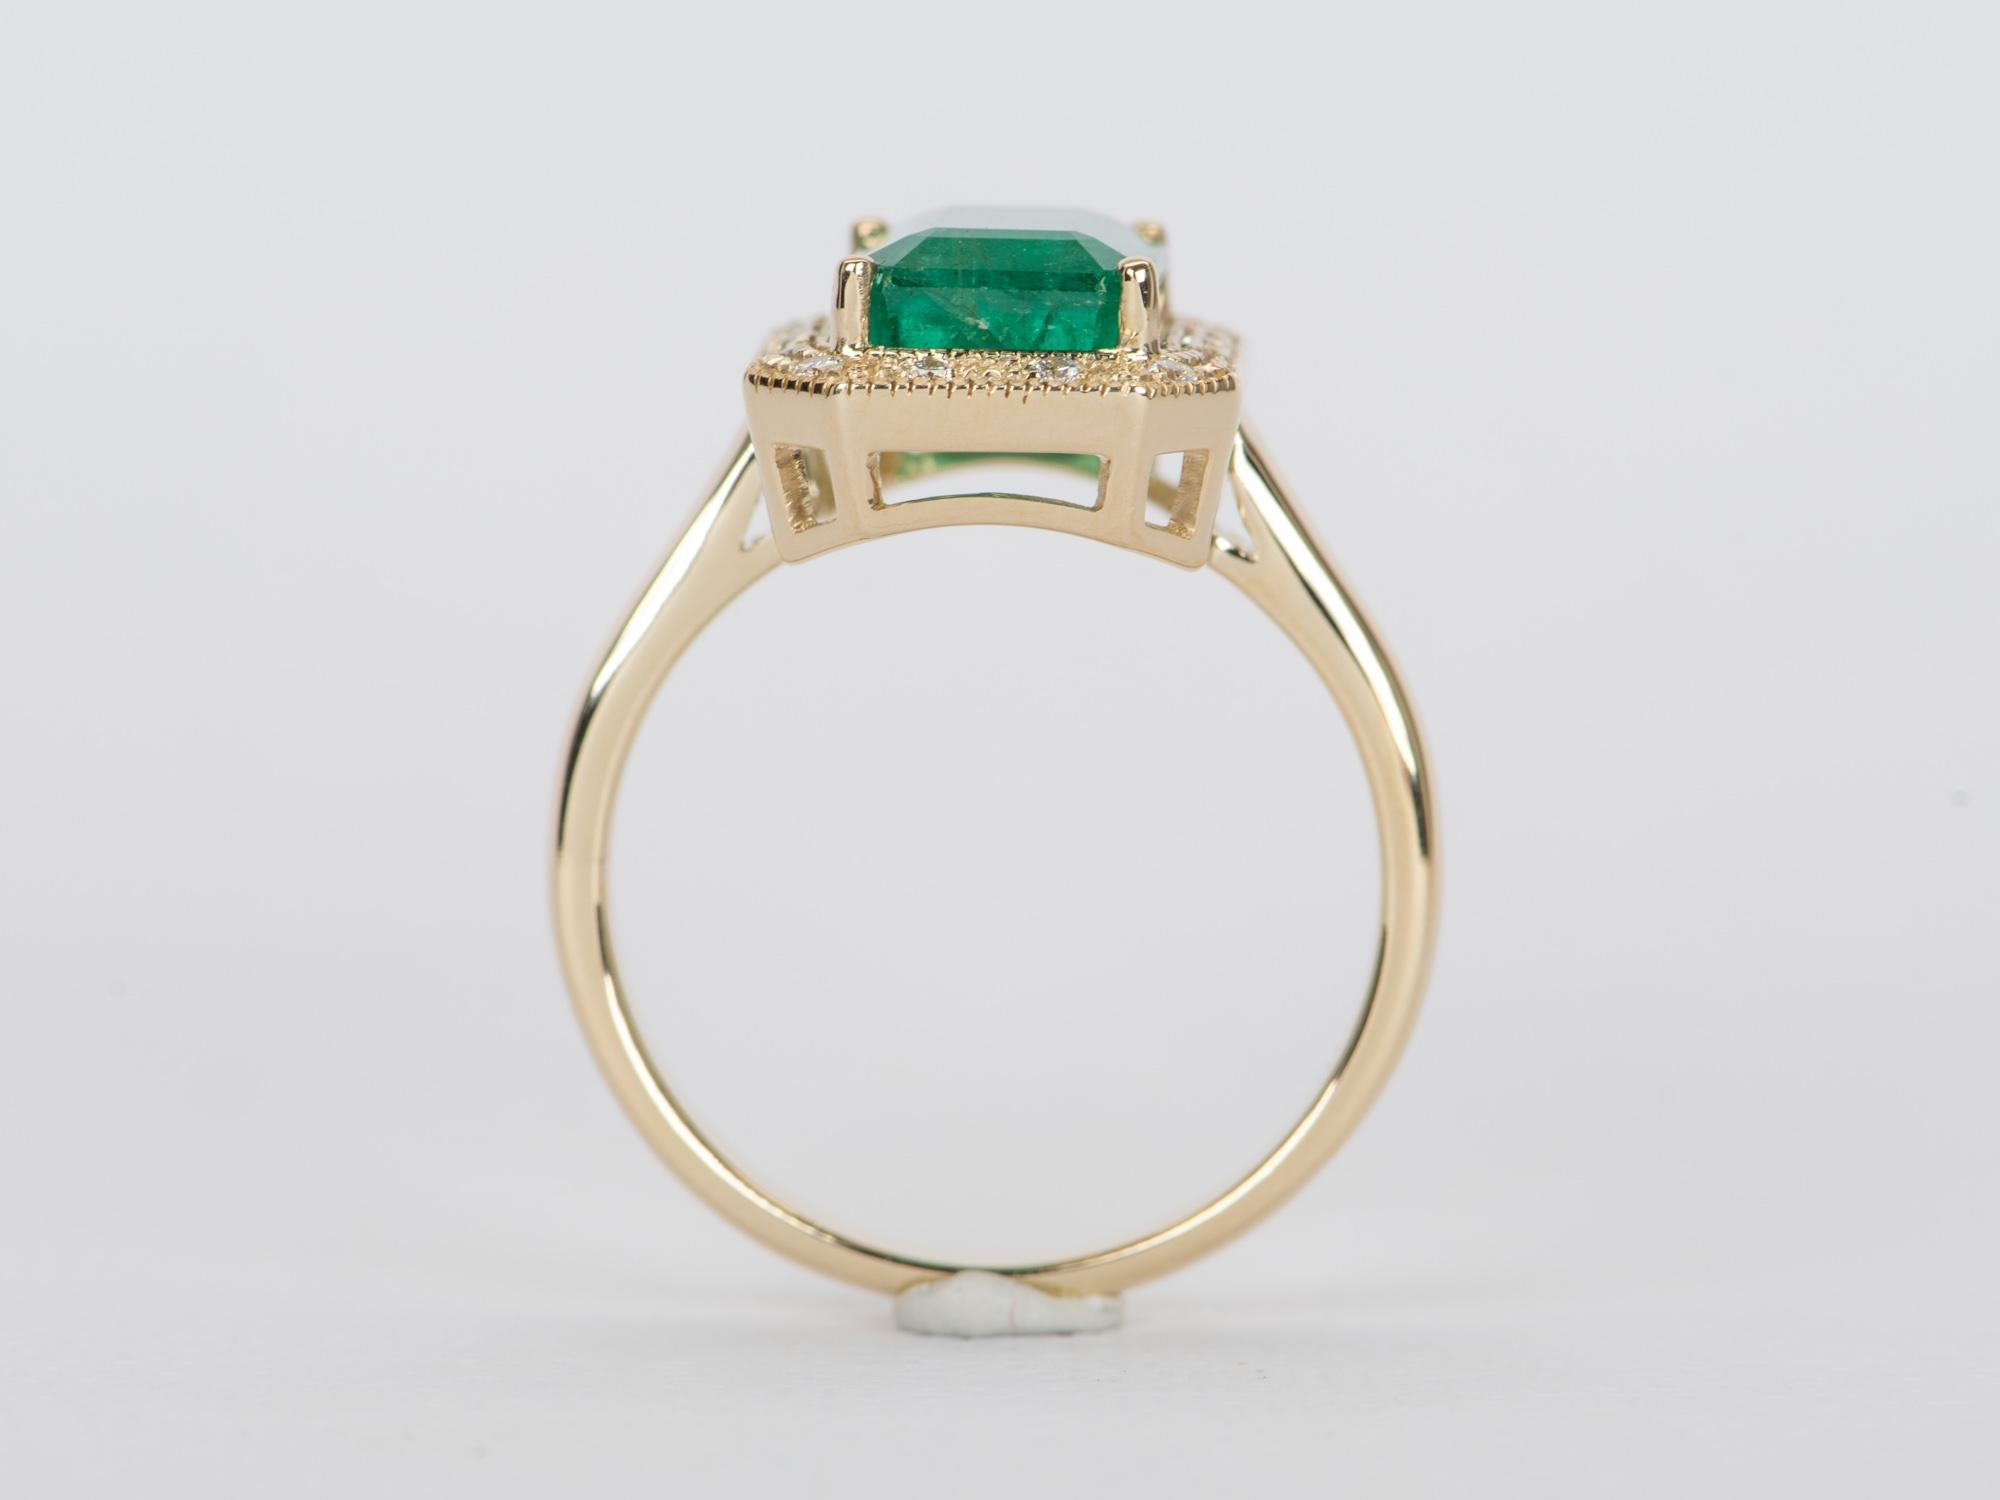 3.31ct Emerald with Diamond Halo 14K Yellow Gold Ring R6359 In New Condition For Sale In Osprey, FL